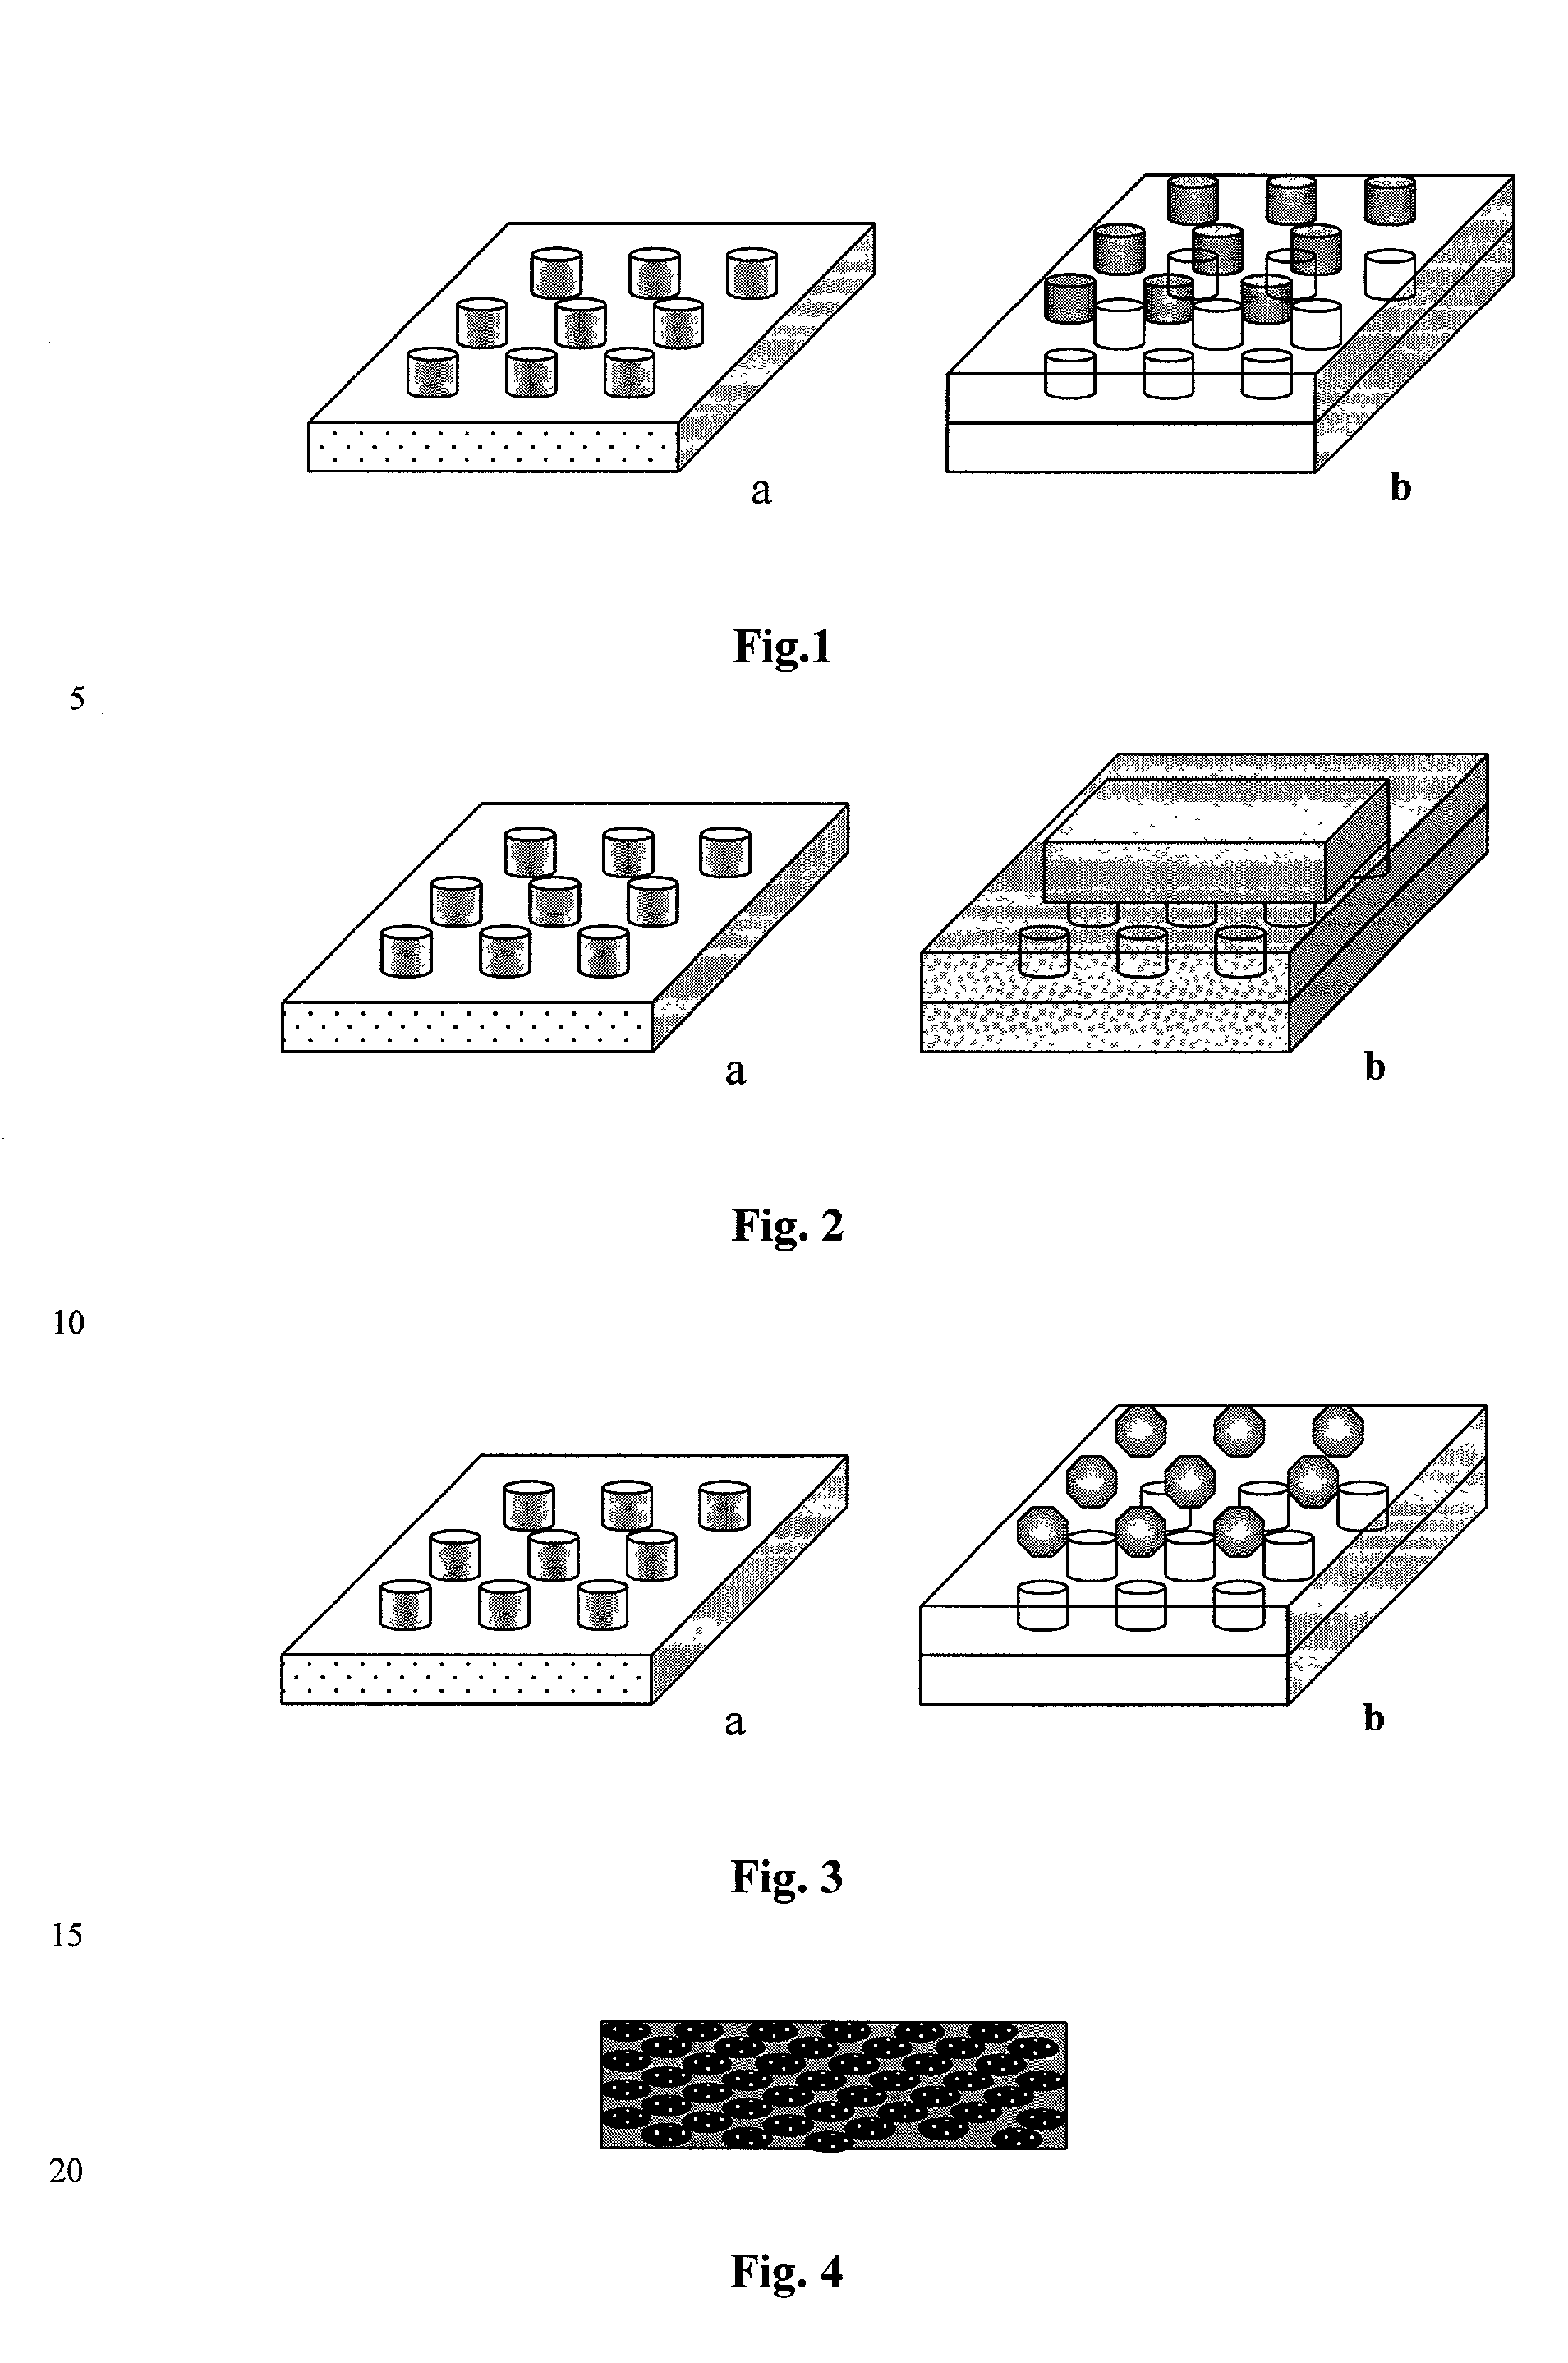 Bulletproof lightweight metal matrix macrocomposites with controlled structure and manufacture the same